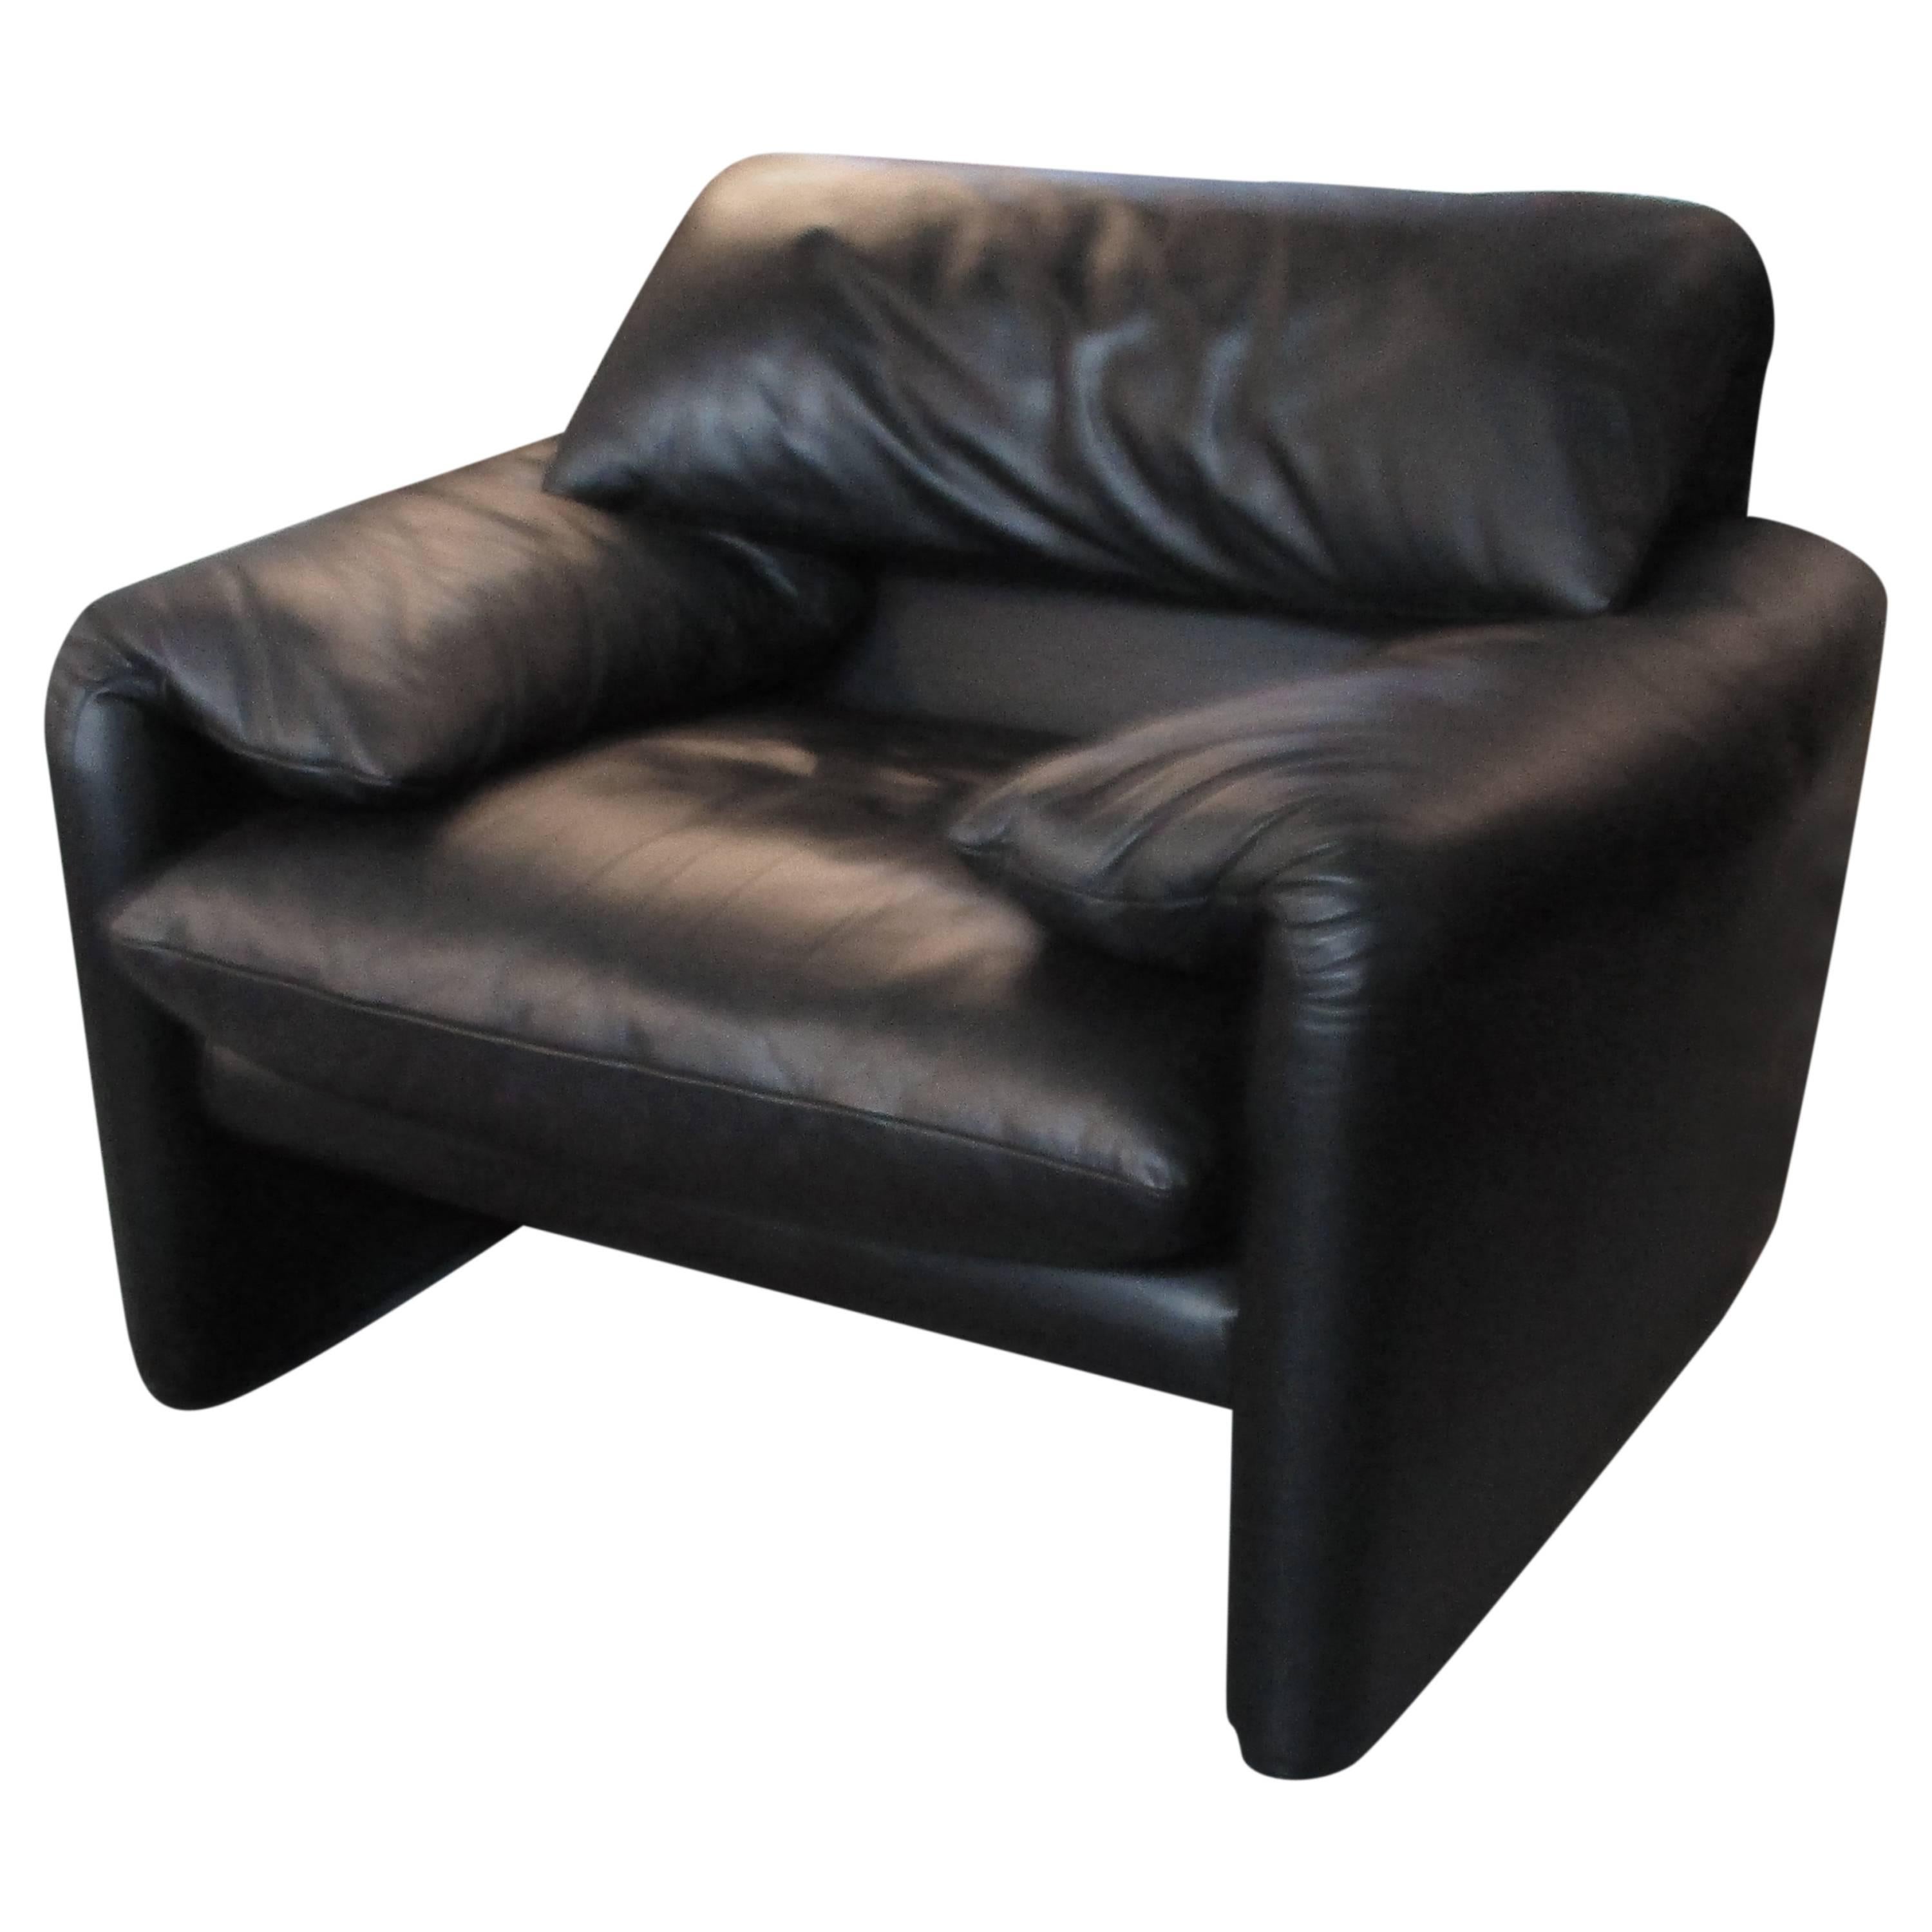 Maralunga Armchair by Vico Magistretti in Black Leather for Cassina For Sale